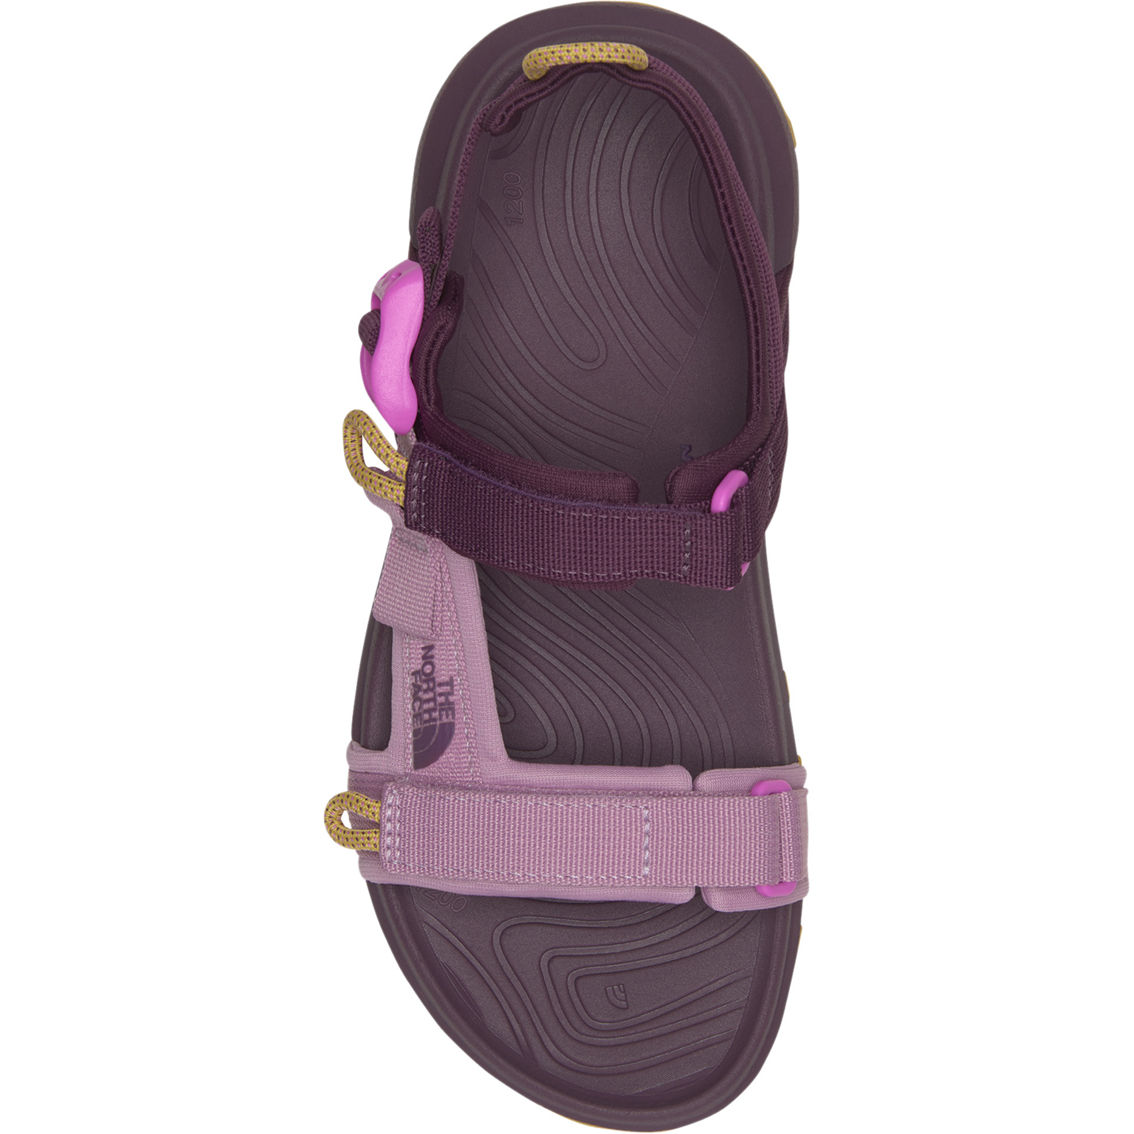 The North Face Women's Explore Camp Sandals - Image 2 of 4